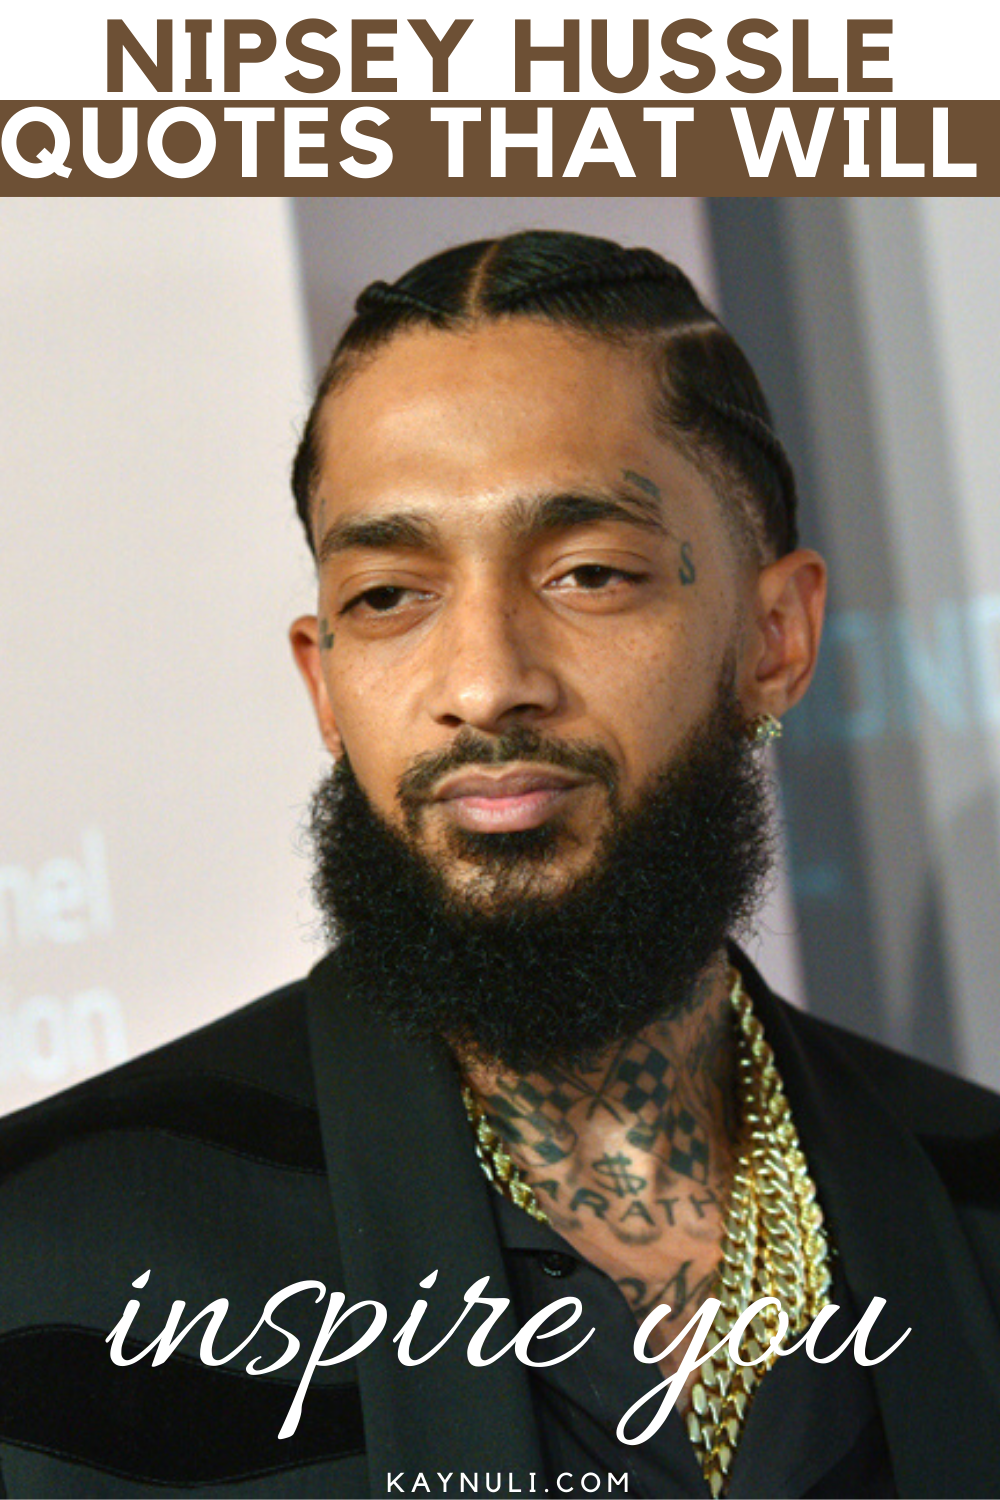 Nipsey Hussle Quotes From His Song Lyrics That Will Inspire You Kaynuli